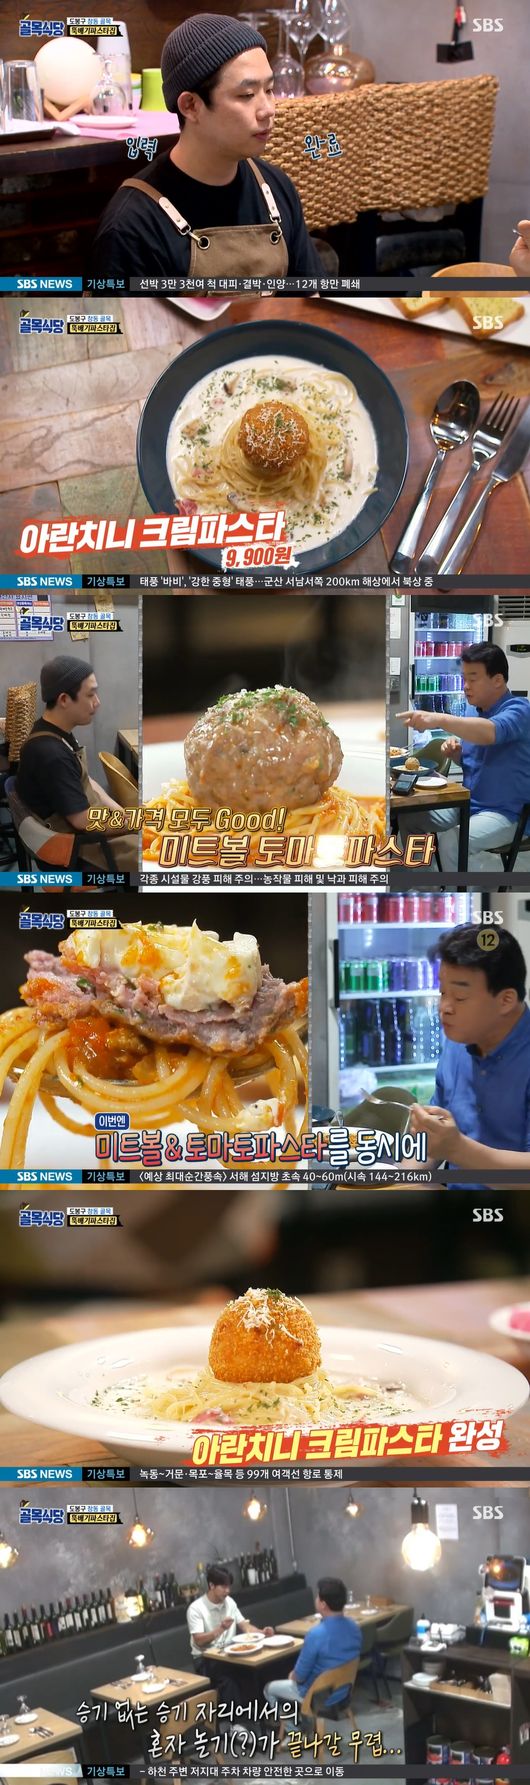 From The Alley Restaurant to Lee Seung-gi to Cho Kyuhyun, he made a surprise visit to the Chang-dong alley in Dobong District and served as an assistant.Dobong District Chang-dong alley was drawn at the SBS entertainment Baek Jong-wons The alley restaurant broadcasted on the 26th.On this day, Baek Jong-won visited the chicken gangjeong house while Dobong District Chang-dong alley was drawn.As soon as Baek Jong-won entered, he checked the garlic in question and said, Do not use chopped garlic, because it smells like sour garlic pickles.Baek Jong-won said, Both of you are too much ahead of the horse, it is good to be good at fighting and good at the guests, but the basics of the food store are taste.Baek Jong-won said, I see you missed the essence, its time to clean up the basics yet, is it embarrassing?I was trying to help the bosses who are trying hard, but I was disappointed when I went over the basics, he said.I did not even look through the garlic bag, it is a play and acting if I do not keep the basics, said Baek Jong-won, who emphasized that there is no meaning if I do not try to do it even if I have a chance of life.The bosses were more eager to make sure that the basics were solid. The bosses bowed their heads, saying, Im sorry.Theres little change in a few weeks, Baek Jong-won said, adding to re-tune the ratio: The most ideal proportion of sugar and starch syrup is important.In addition to garlic, the chickens were the chiefs of the Kangjeong house, which had many things to supplement.Baek Jong-won told the chicken gangjeong house, If you prepare, I will send a difficult brother from this neighborhood.Lee Seung-gi appeared in surprise, and Baek Jong-won asked for feedback while raising the flag of the two presidents who died.I asked for some advice and affectionate advice, and I arrived at the chicken gangjeong house and asked me carefully from the target audience.Lee Seung-gi, who was praised for I came to see the size and fry coating, relaxed the bosses; it made everyone admire with a genuine Maseong talk skill.Lee Seung-gi quickly turned the topic to the dead boss and continued the friendly atmosphere with the story of the neighborhood.Lee Seung-gis friendly consideration, the president, melted his heart, I boasted that our school had Lee Seung-gi, he naturally focused on cooking.Lee Seung-gi, the president who was relaxed because of Lee Seung-gi, decided to taste three different chicken gangsters with blind tests.Lee Seung-gi, who tasted carefully one by one, chose a sugar ratio higher than starch syrup, and the president, who was opposed, also listened.MCs who saw this said, I look at the typical student chairman style and a few opinions, he said, a steam leader who gently induces opinions to the right answer after collecting opinions.Lee Seung-gi said, I am honored to be able to develop together, once I accept the opinion of Mr. Baek Jong-won, make my own idea. He expressed his encouragement with a warm heart and heart like his senior and local brother.He delivered a 100,000 won cheering car and said, Buy more materials and practice more. He left a commemorative photo with Chang-dong Brothers.Next, the NO delivery Pizza house was pictured.The Italian chef, who was SOS by Baek Jong-won, said, Pizza is a popular food, and said he would deliver the price to Chang-dong commercial area.Baek Jong-won added a large-capacity recipe by gradually increasing the amount from menu to sauce, cheering for the boss to find his own taste. He said he would keep the sauce taste but increase the amount.Decided to check the large-capacity Pizza sauce, Baek Jong-won again found the NO delivery Pizza house.The president immediately introduced the Pizza he studied and completely changed his style in a week after the solution, making Baek Jong-won desperate.Baek Jong-won showed the principle and difference of toppings directly, saying, We need to know the principle of Pizza.In the situation room, Cho Kyuhyun came back as a Pizza craftsman, and his hometown was nearby.Cho Kyuhyun visited the NO delivery Pizza house, saying, I did not live but it was an alley with memories during my school days.We decided to try the new menus, Pizza and Pizza.In half-expected, Cho Kyuhyun approached the kitchen and studied how to make Pizza. The boss was nervous.Finally, Pizza was completed and first tasted from Pizza. Cho Kyuhyun said that toppings were new and I do not think it is an impressionable taste.Then I heard the price and said, Pizza is good for caustic rain.Salami Pizza also tasted, and Cho Kyuhyun carefully tasted it again, saying, The red pepper oil is not spicy but the taste is not clear.Cho Kyuhyun added, I usually use red pepper oil, but I do not feel more special because red pepper oil is in.Baek Jong-won and MCs also looked at it on the monitor, saying, There is a lot of toppings.Baek Jong-won called Cho Kyuhyun and said, I am looking at it accurately. He pointed out that the toppings made the taste rather bland, and asked the president to make it as he learned.The president made Pizza again from the beginning by utilizing memories he learned again.Pizza with proper toppings was sampled again, Cho Kyuhyun said, It is a more savory taste. He said that the taste was changed even if the amount of topping was reduced.Salami Pizza also has less red pepper oil and is not thick.Baek Jong-won also expressed his pride in saying, This is why the third party should come and eat, agreeing that the balance of toppings and the harmony of toppings are important.At the end of the Chang-dong alley solution in Dobong District, Seoul, I visited the Pasta house.In the situation where I studied cooking with meatballs and Arachini Pasta, Baek Jong-won said, Pasta rubber Lee Seung-gi is a praiseworthy taste.Baek Jong-won said, This is why Mr. Seung-gi is perfect, he said. It is a taste that I want to add.Savoie is good, he said, admiring both the taste and the price. It is a taste that I want to order both menus.As a result, the president completed four menus and impressed Baek Jong-won by saying, I want to grow slowly rather than greedy.The alley restaurant captures the broadcast screen